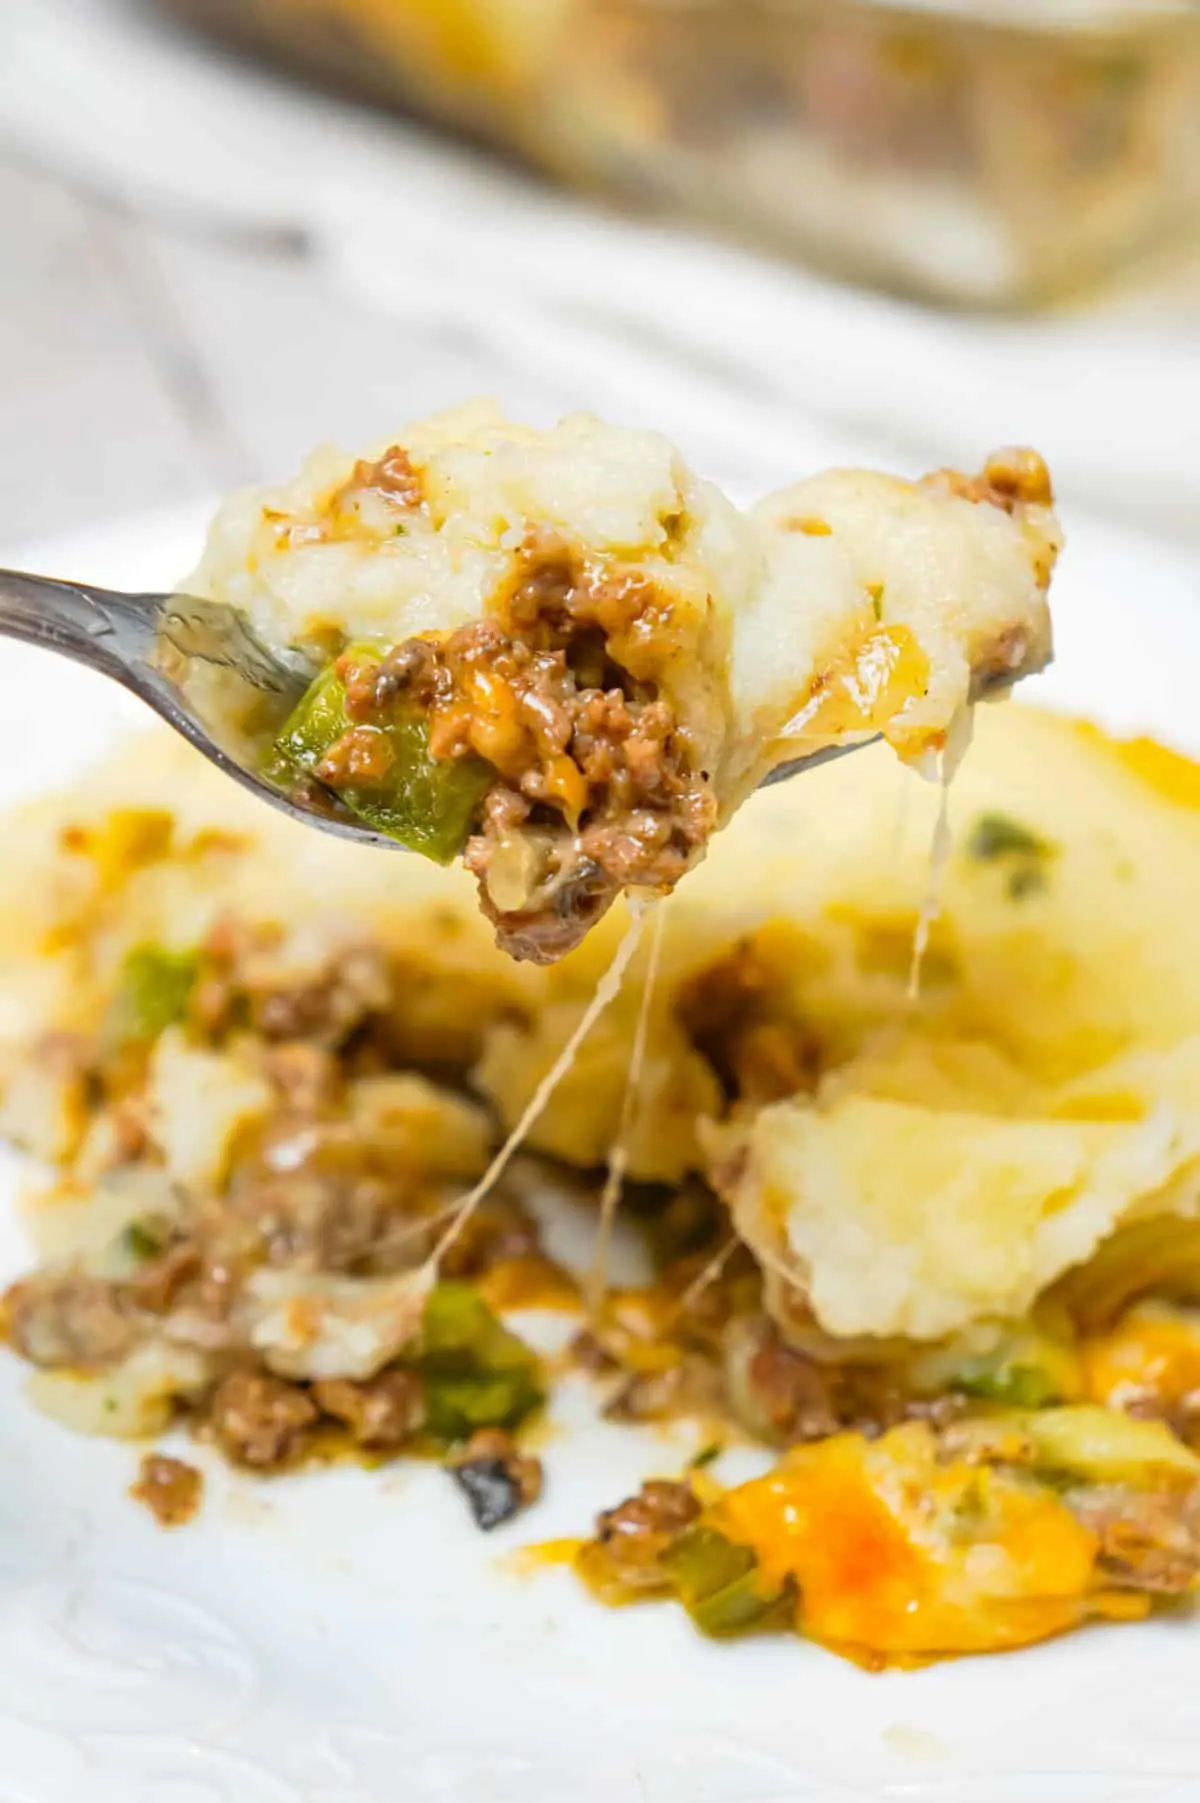 Philly Cheese Steak Shepherd's Pie is an easy casserole recipe loaded with ground beef, onions, green peppers, cheese and mashed potatoes.